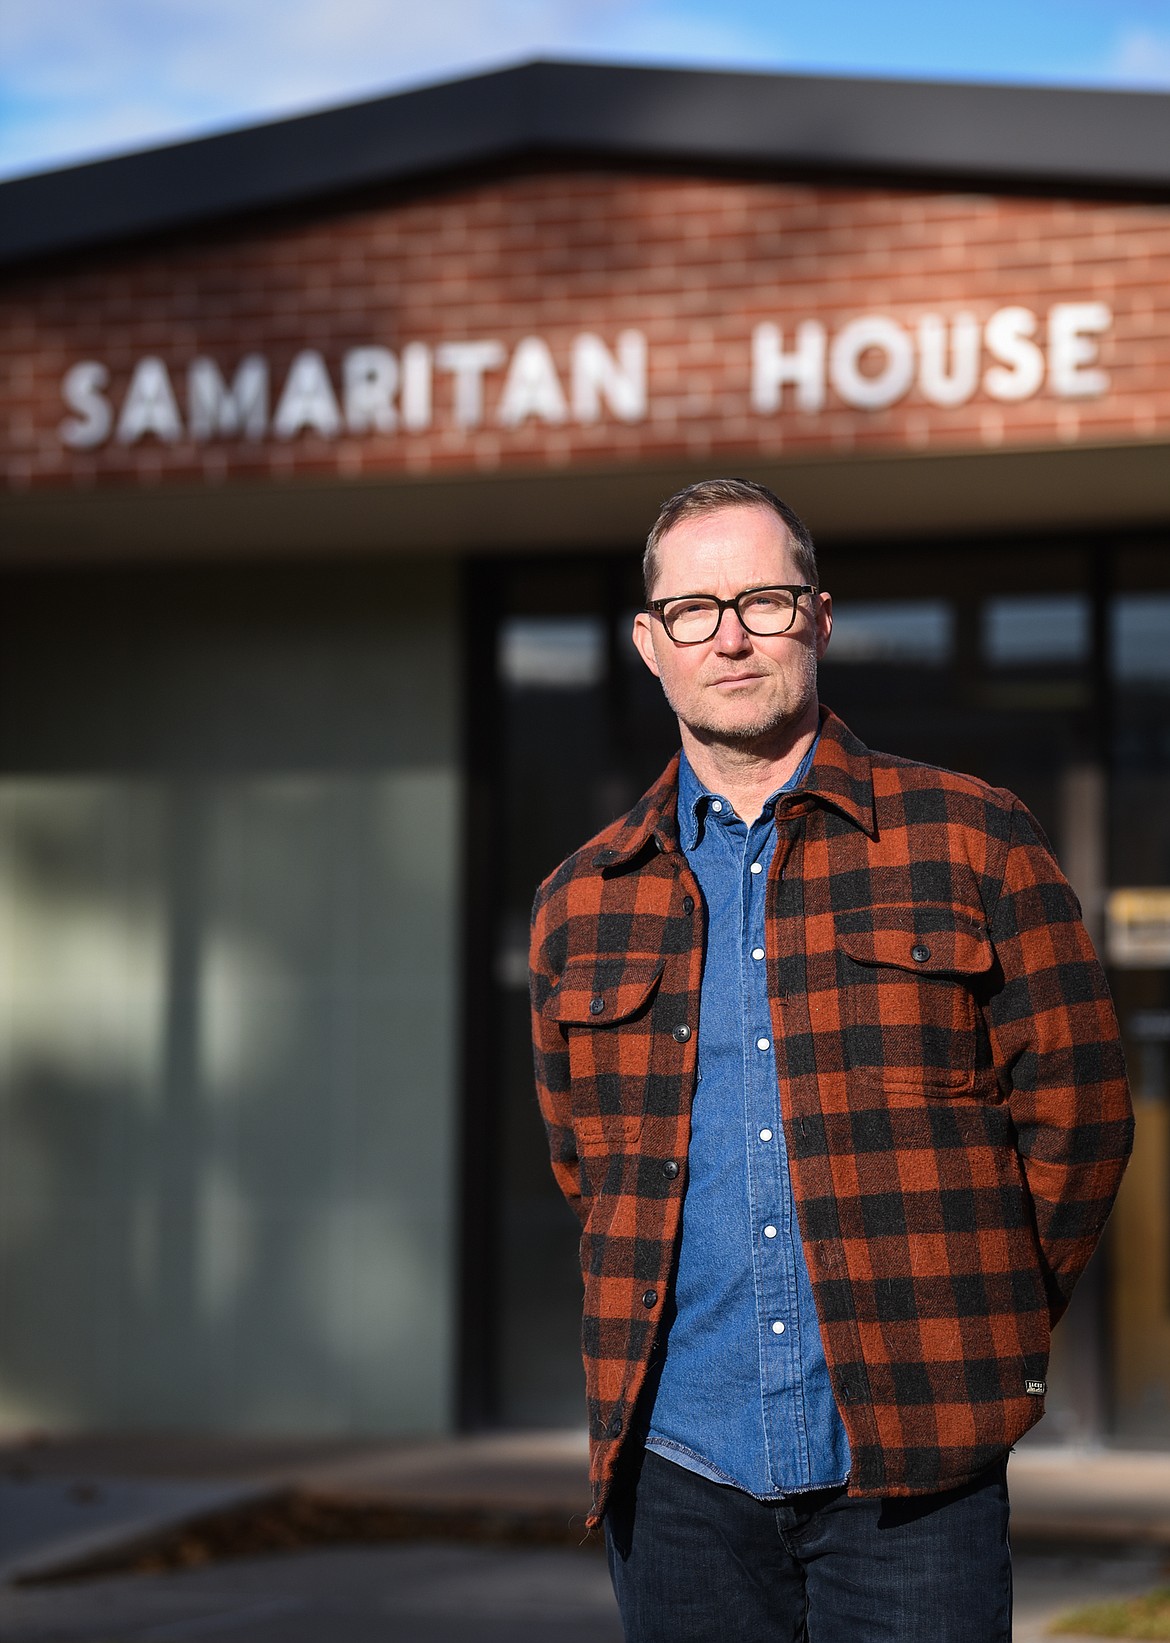 Samaritan House received the Kalispell Chamber's Nonprofit of the Year Award. Executive Director Chris Krager is pictured outside the Samaritan House offices in this 2020 file photo. (Casey Kreider/Daily Inter Lake)